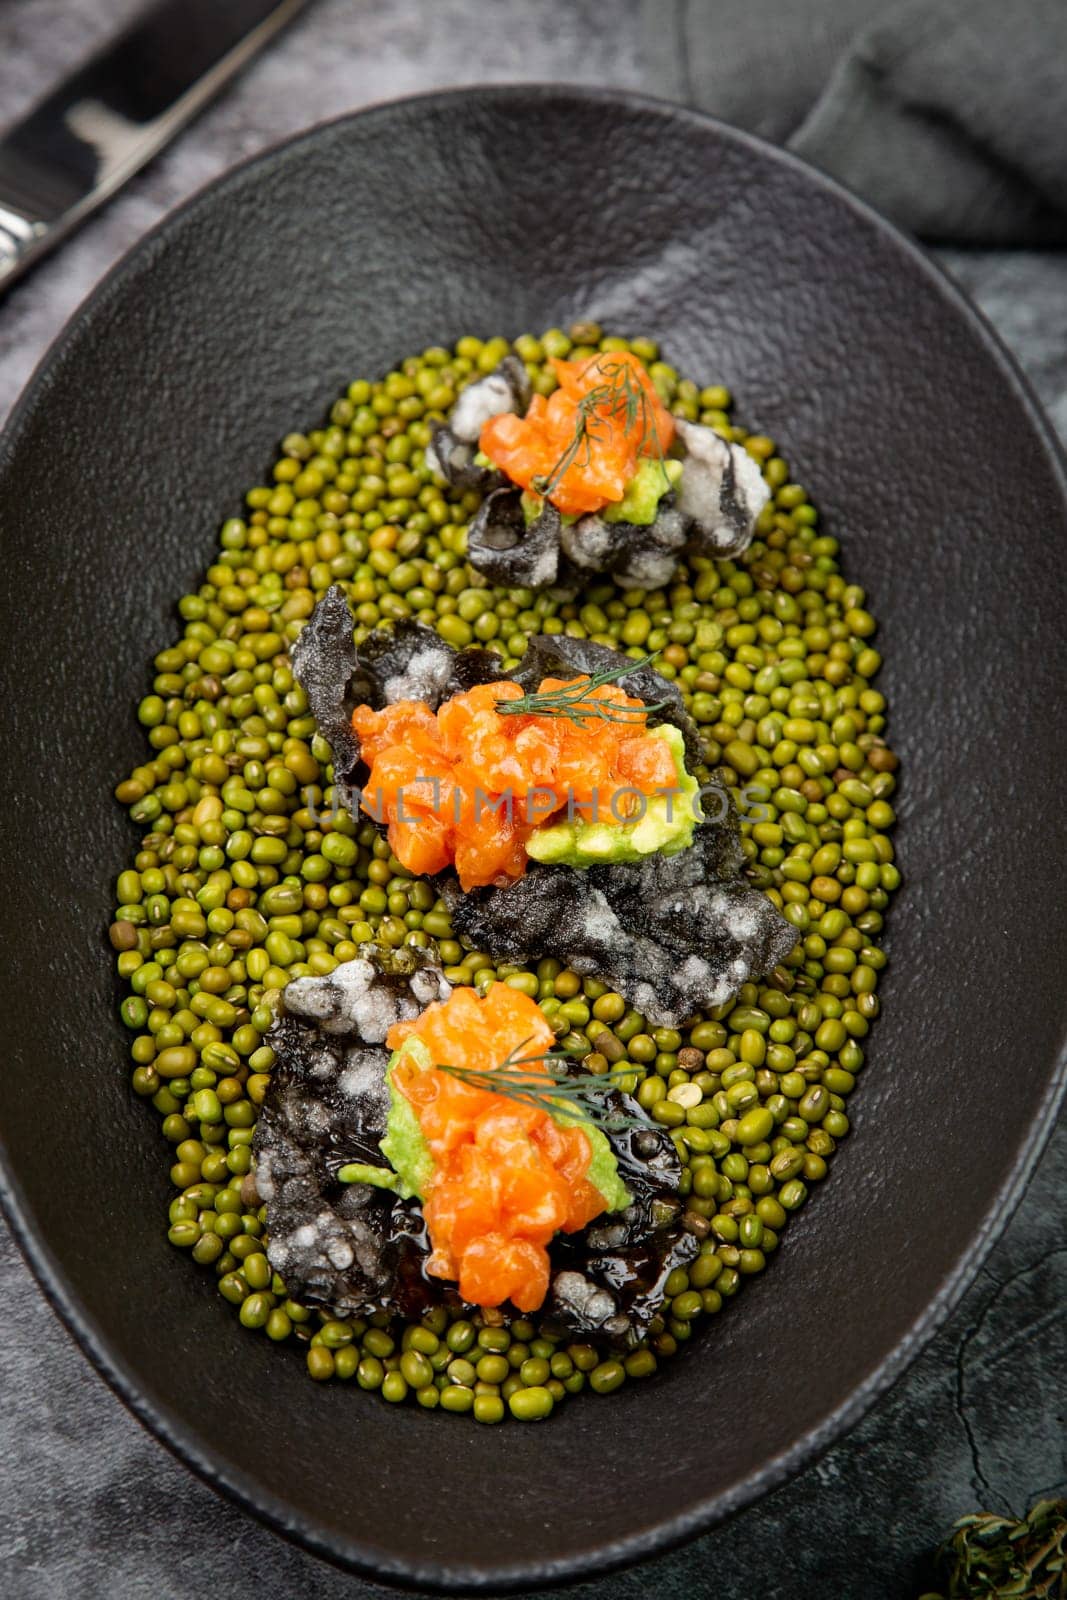 black caviar, red fish and wassabi on a plate with peas